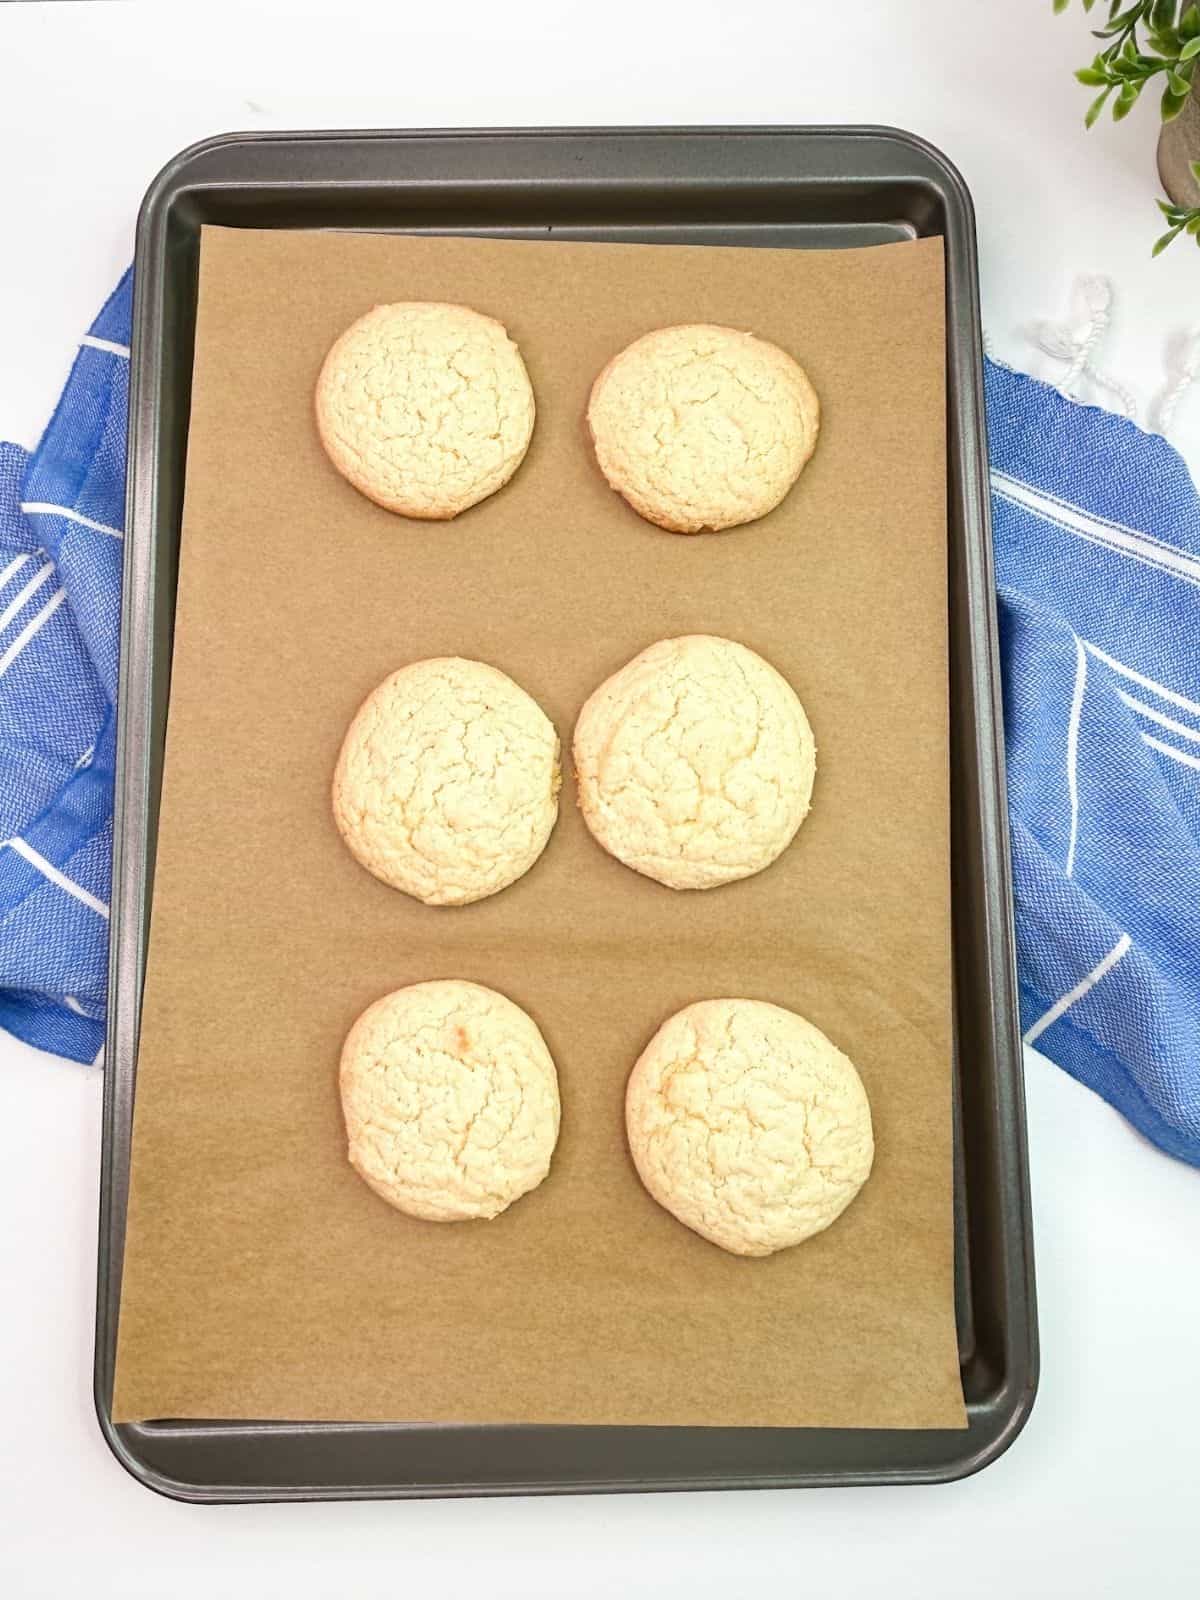 baked cookies on a cookie sheet